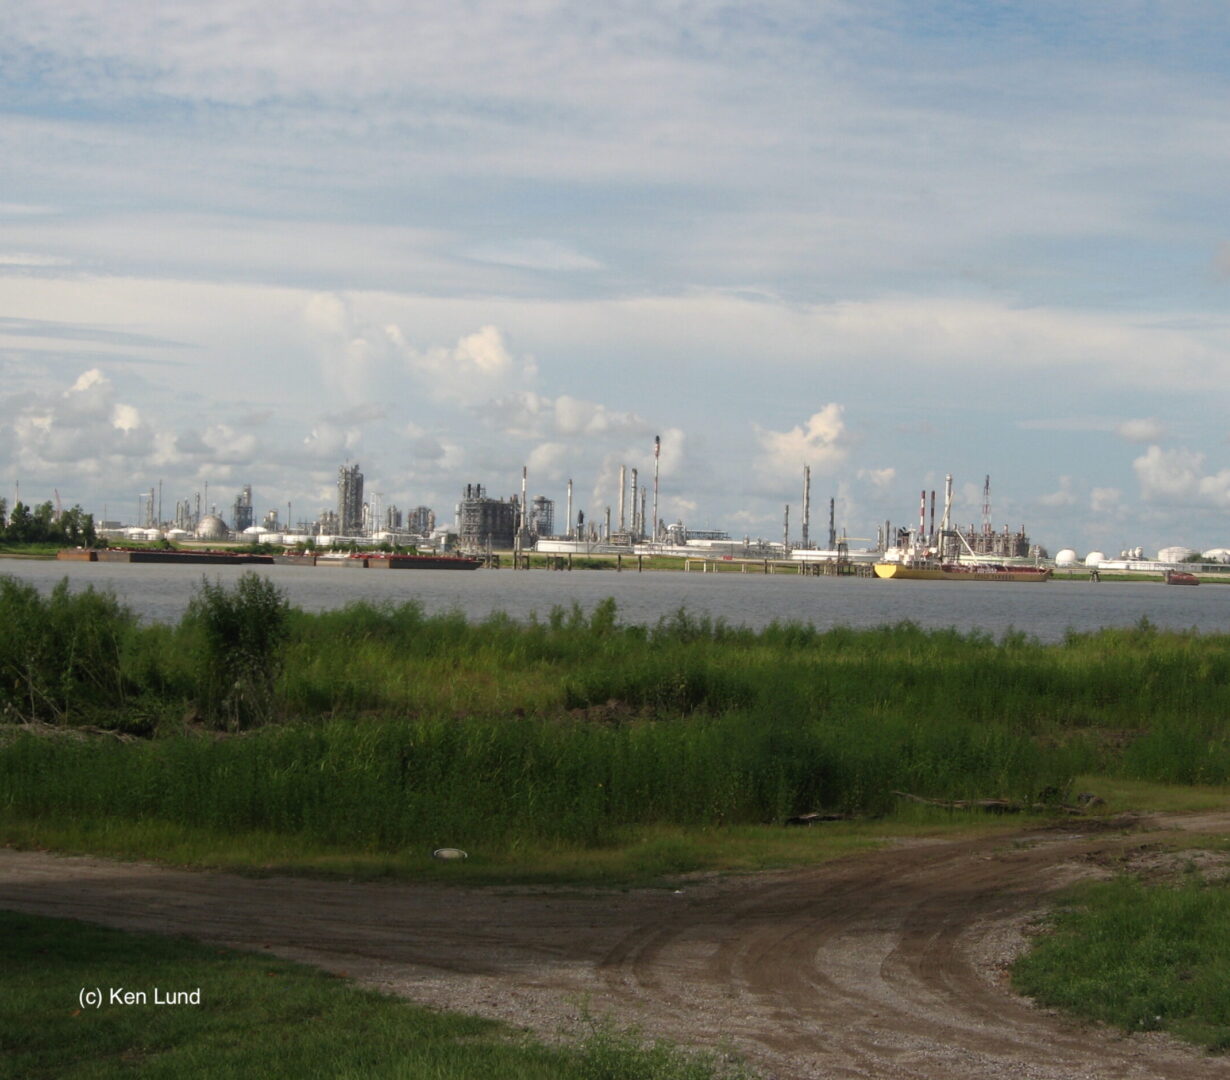 Monitoring Petrochemical Buildout in the Gulf South